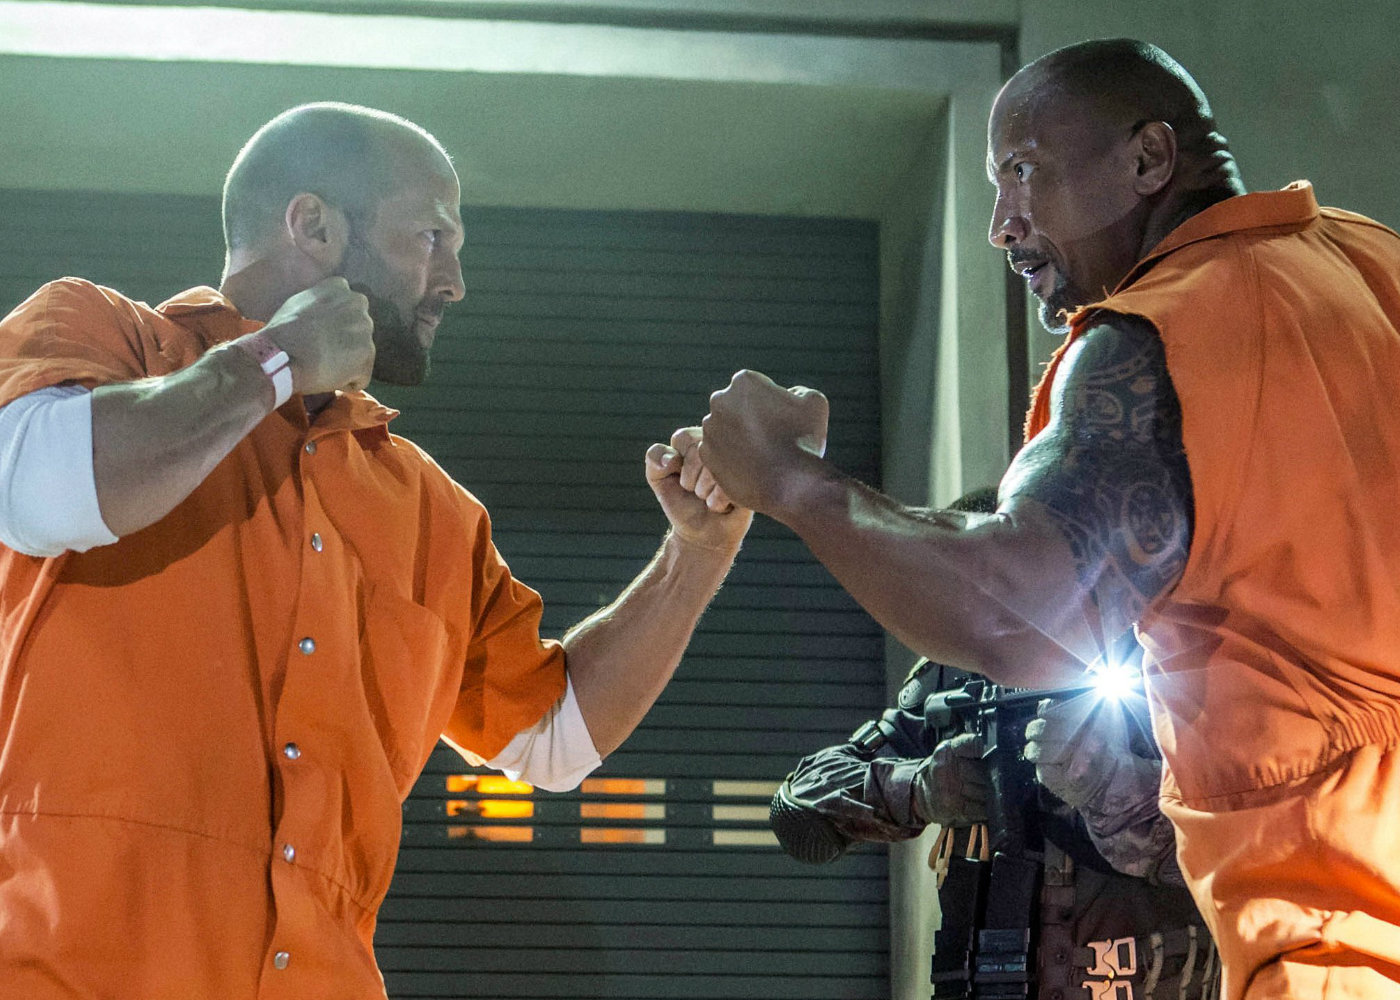 Fast & Furious Franchise Could Expand With Dwayne Johnson, Jason Statham, and Charlize Theron Spin-off